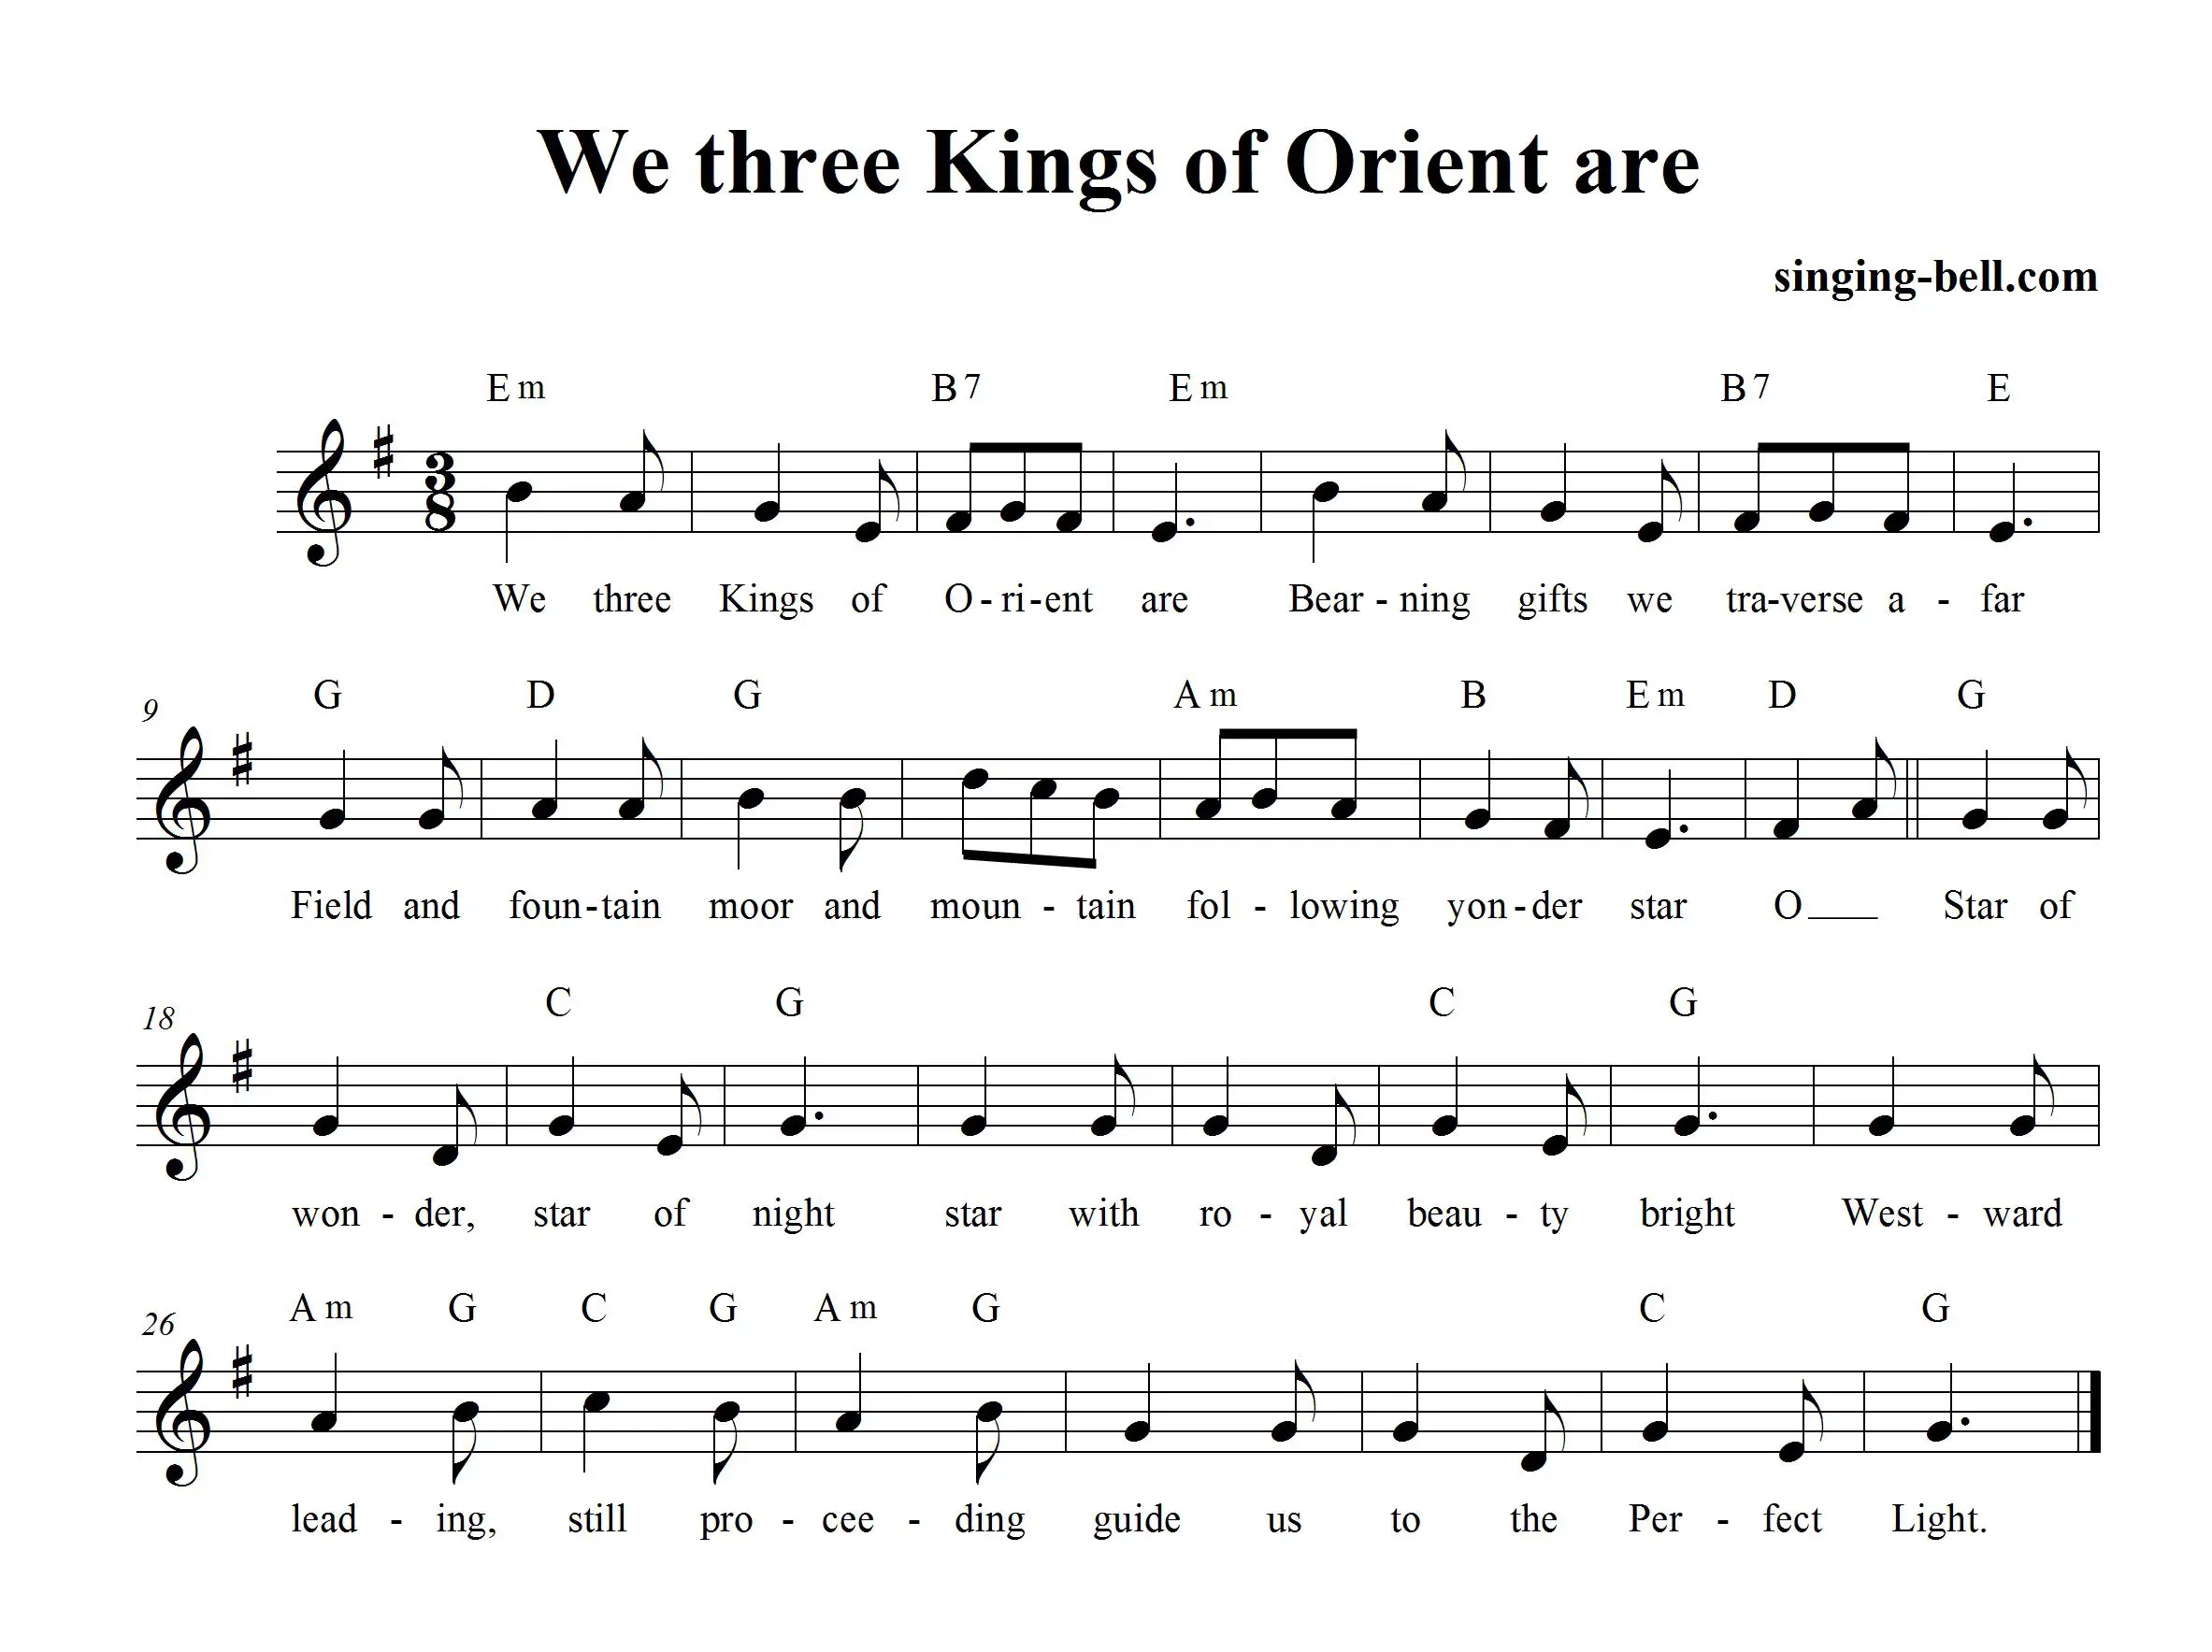 We Three Kings (of Orient Are) - Free Christmas Music Score Download